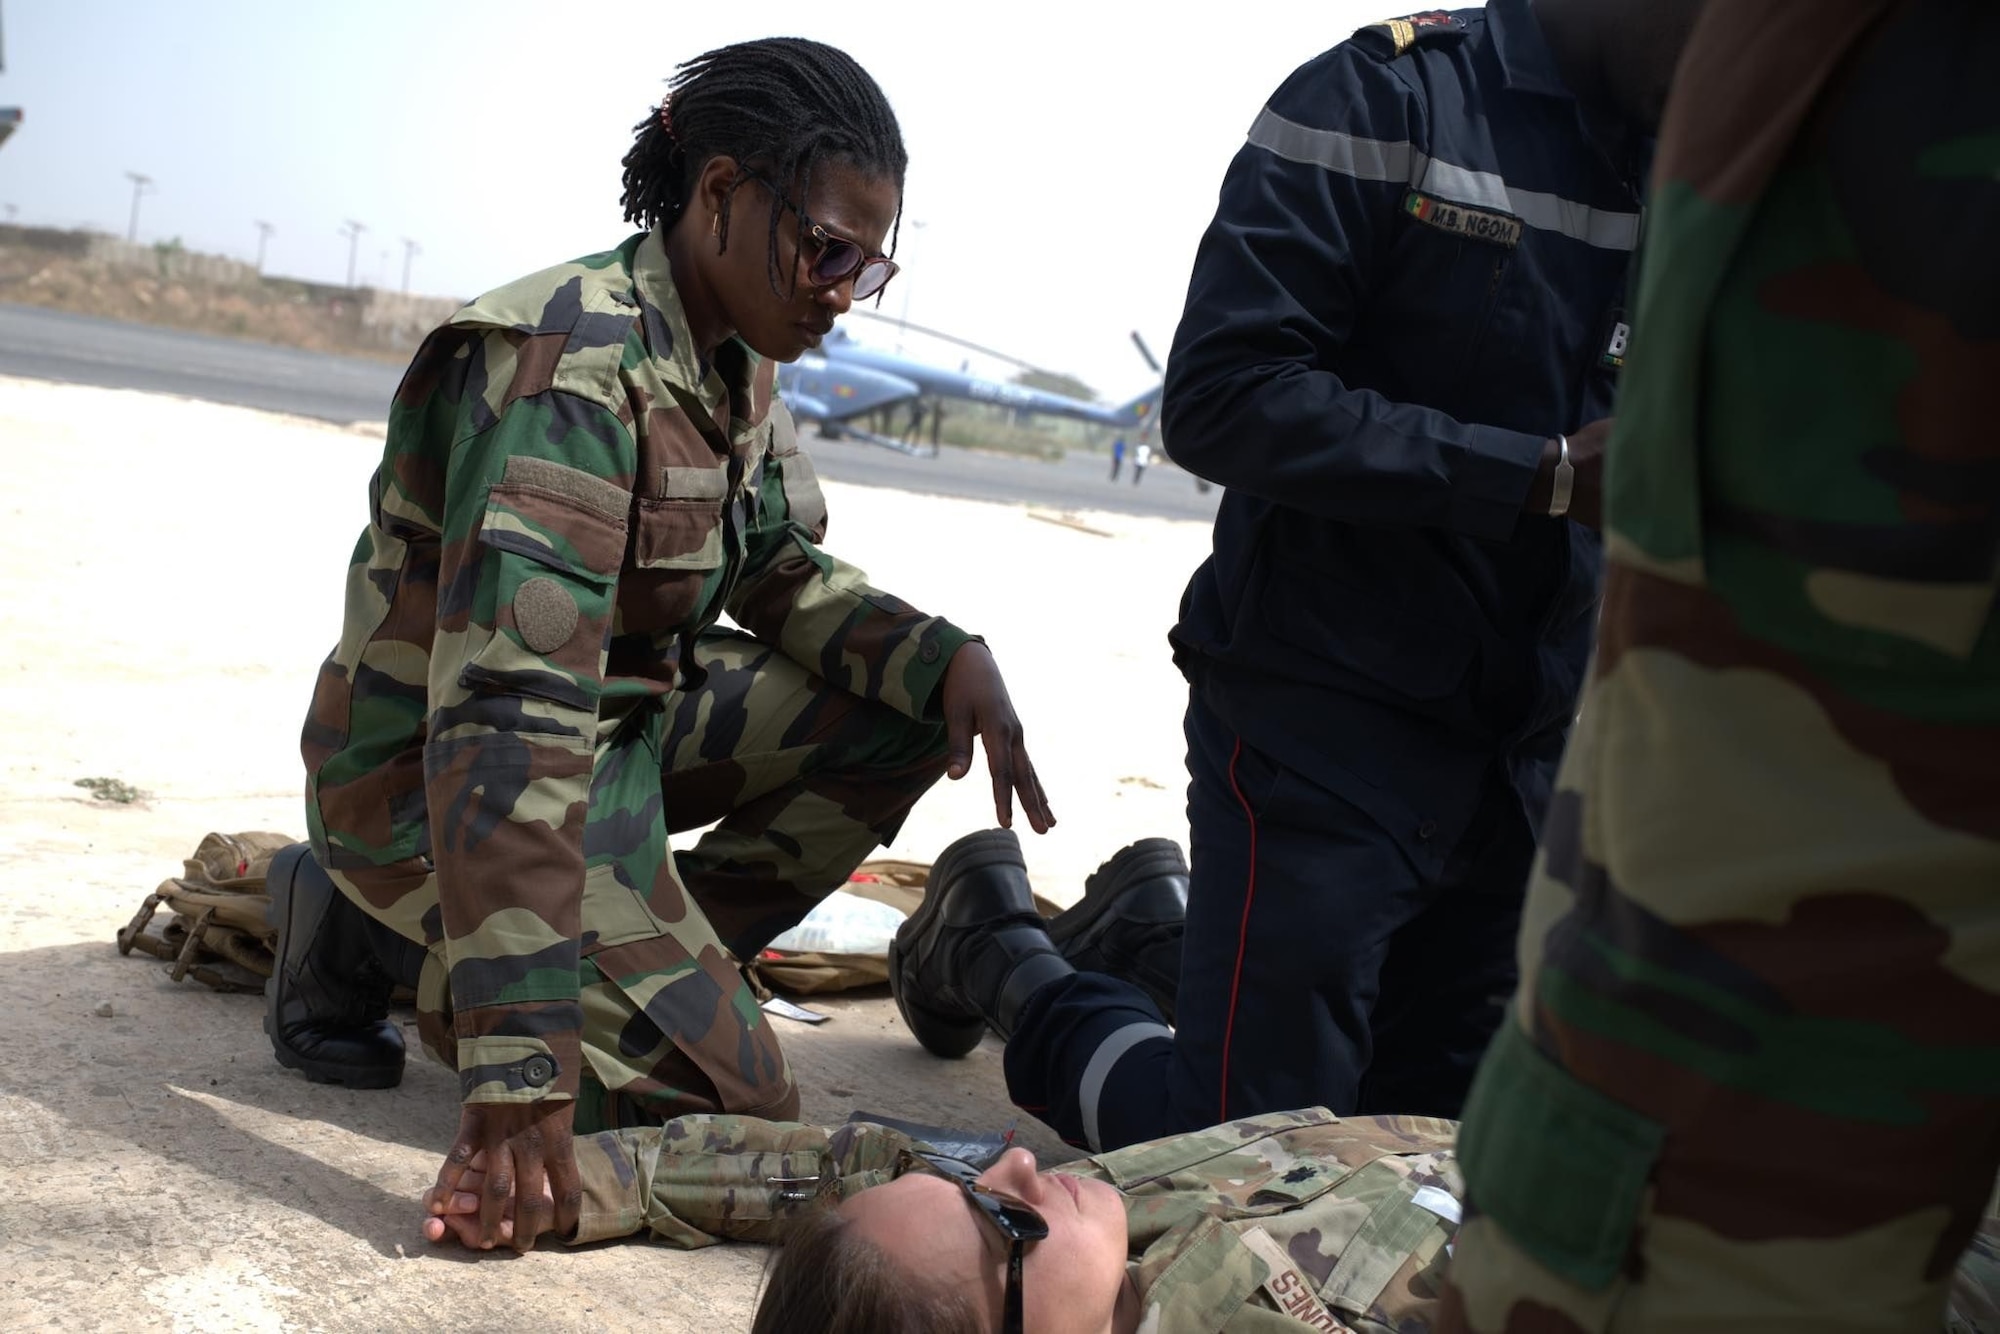 The culmination of these efforts leading up to Phase V marks a significant milestone for Senegal's military capabilities and their commitment to achieving United Nations validation.